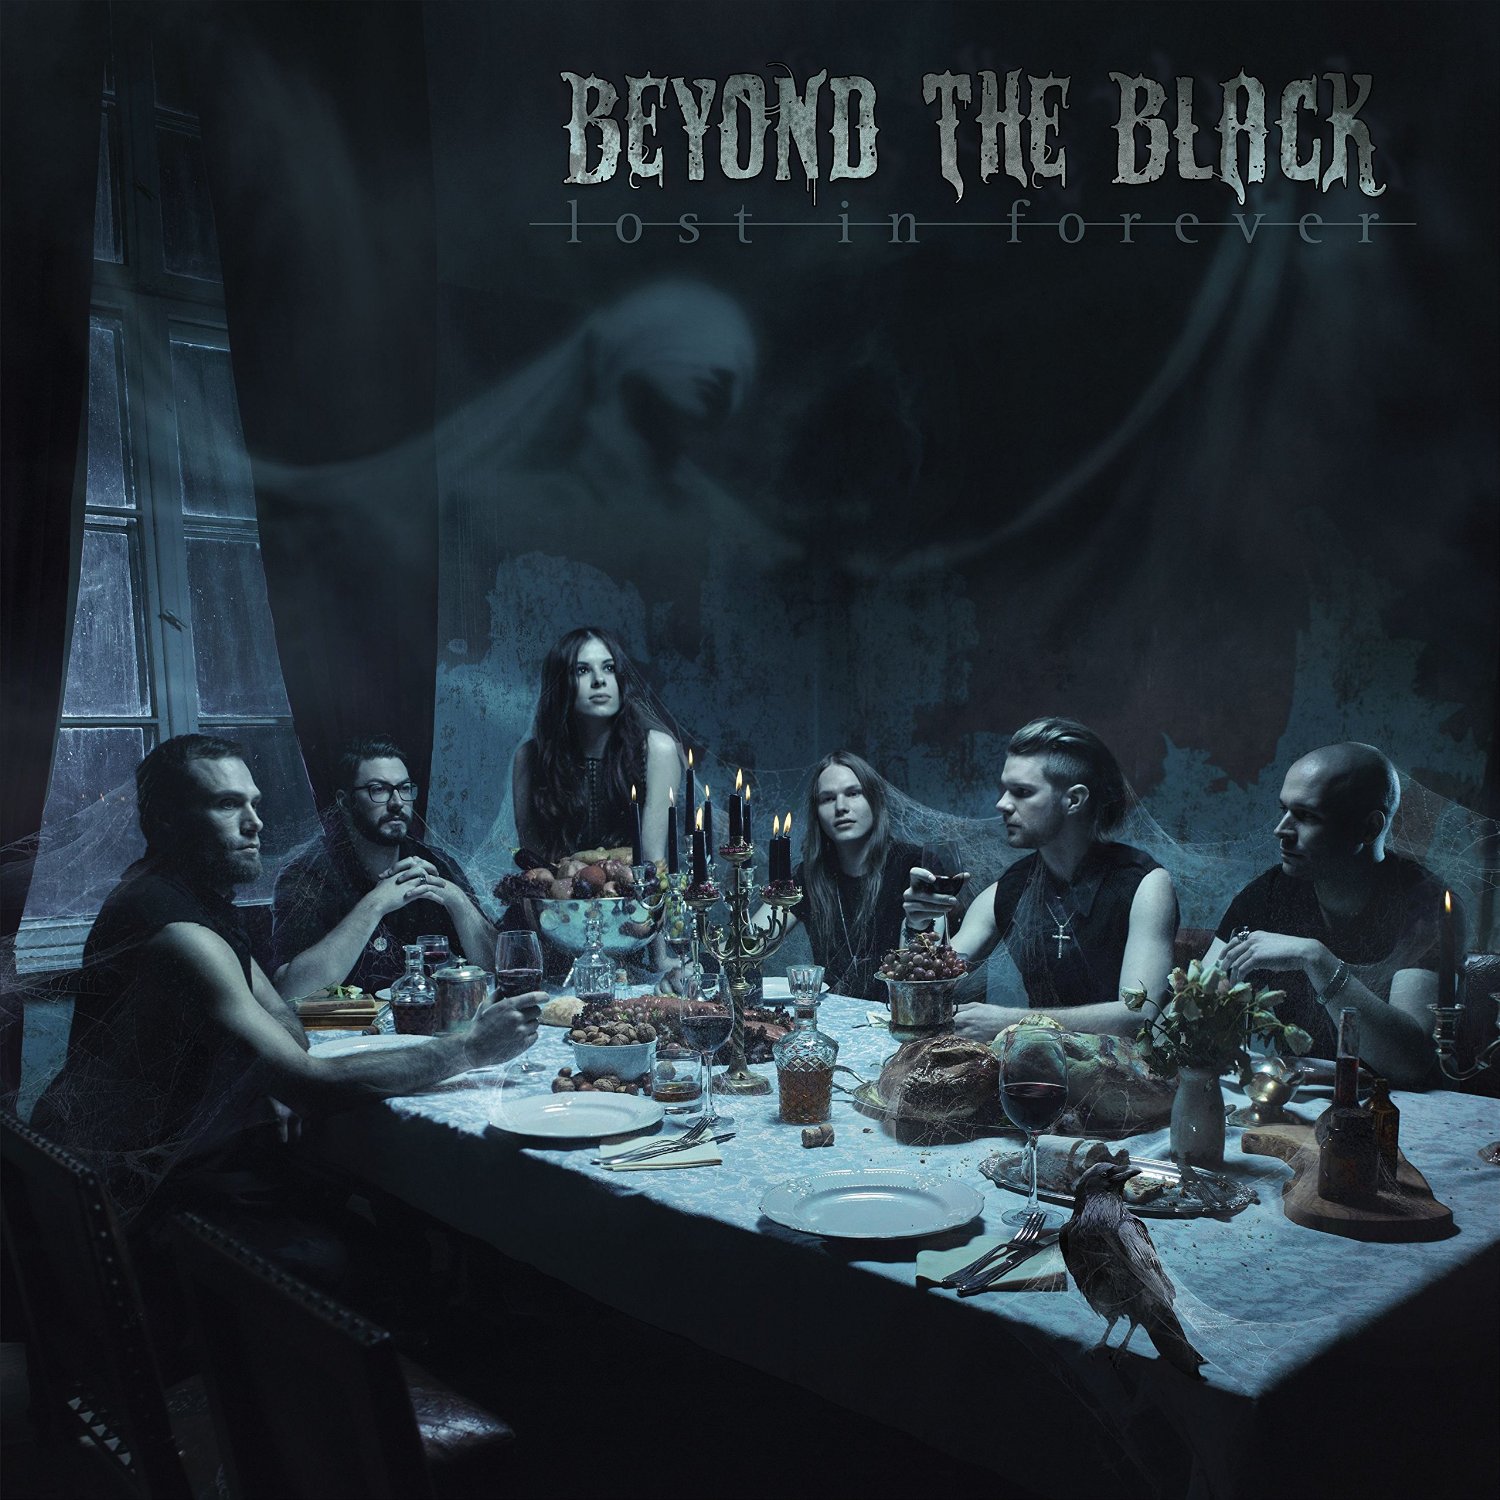 beyond the black lost in forever a